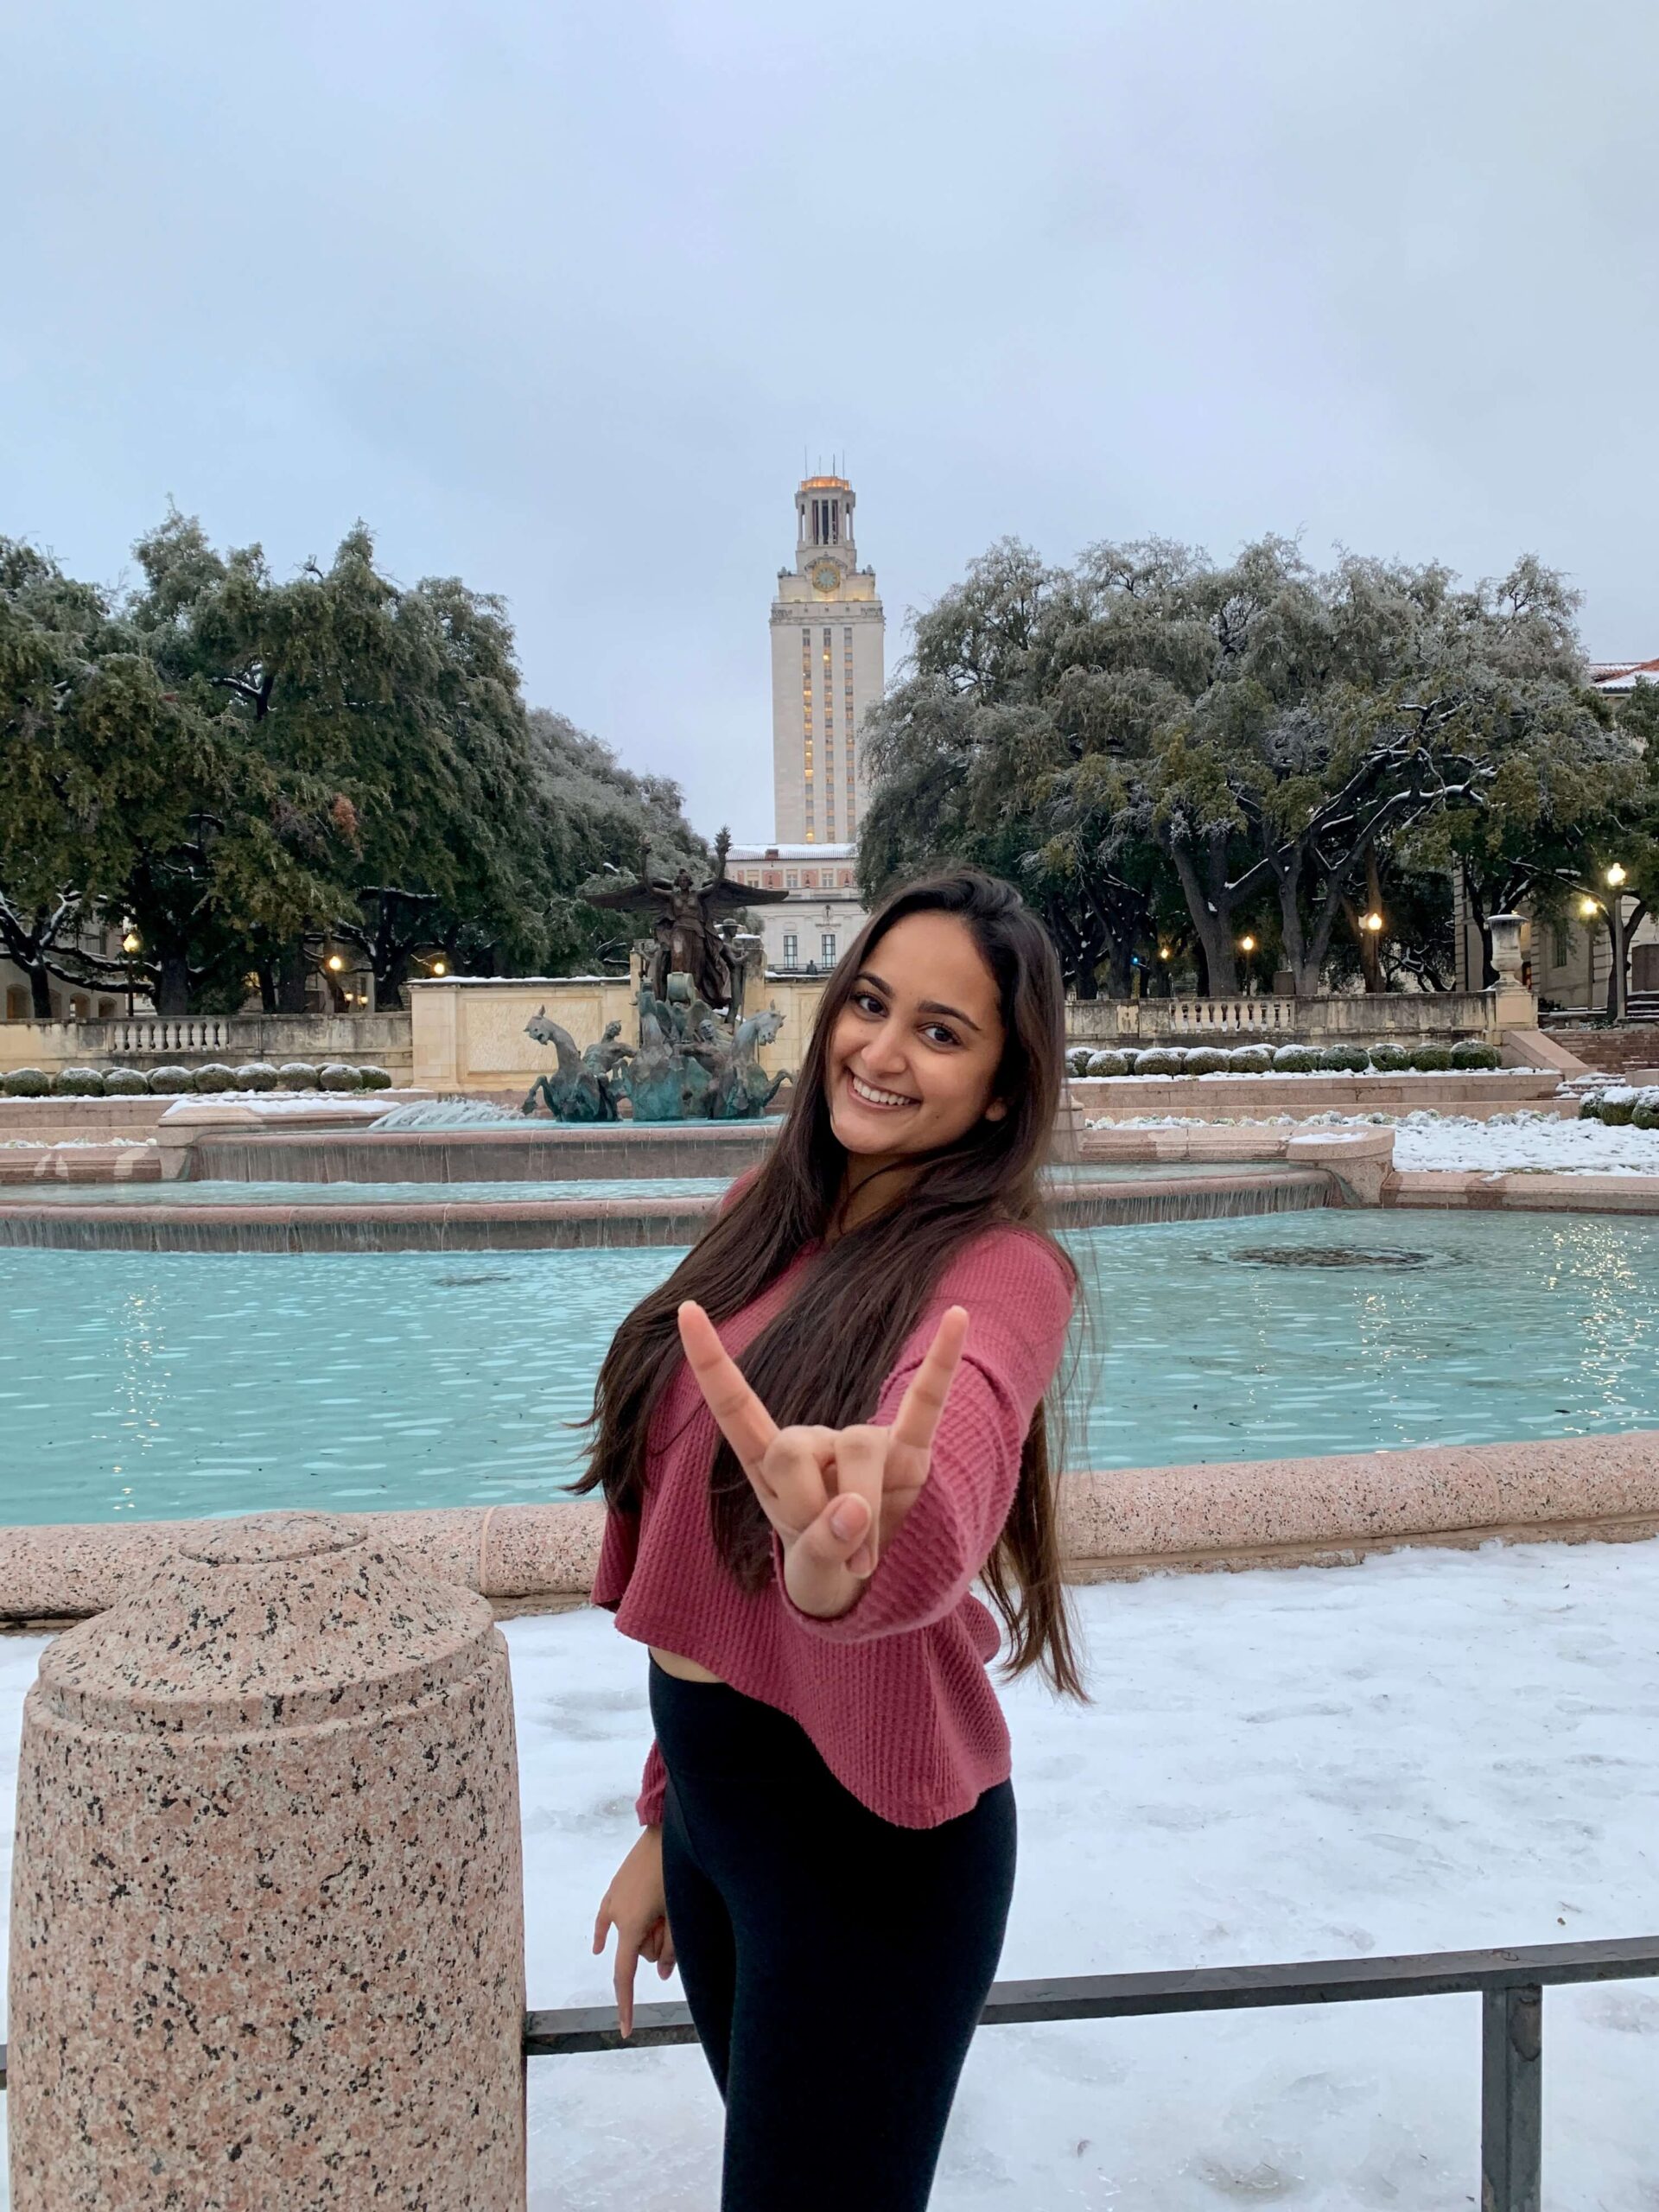 Project Yellow founder giving Hook 'Em Horns hand sign in front of UT tower